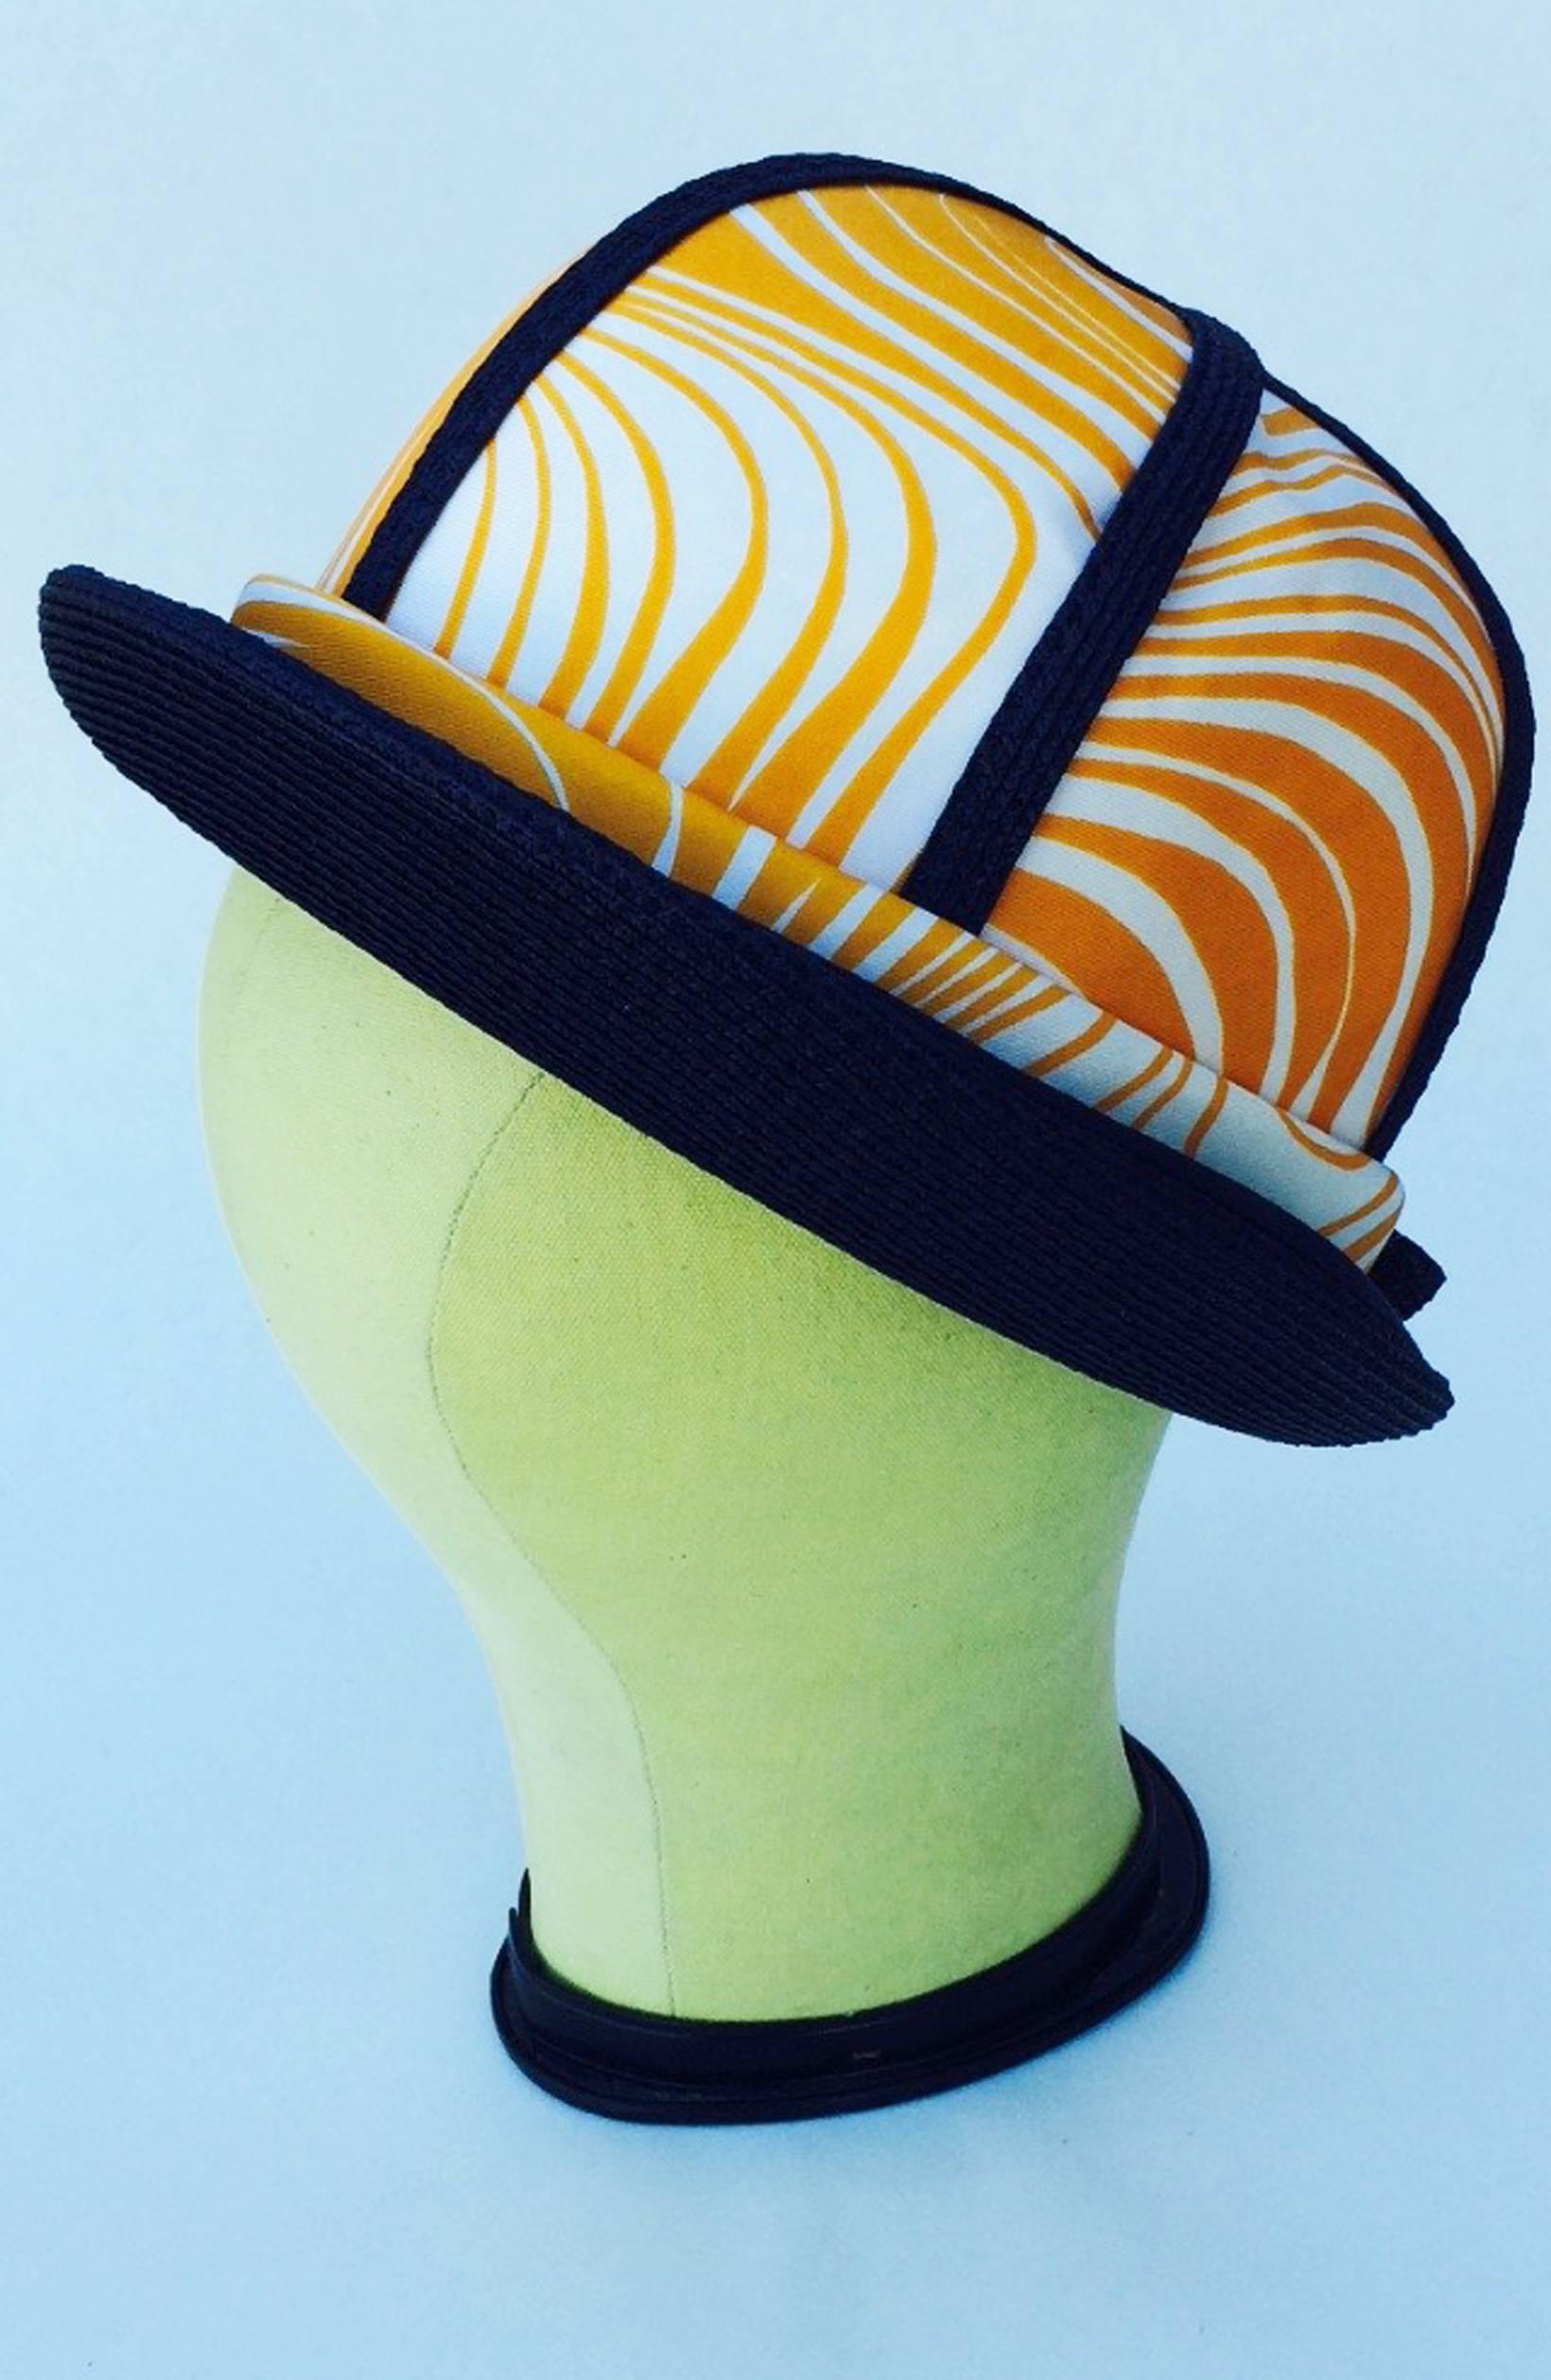 A fine vintage Oleg Cassini bowler hat. Authentic mod period print item trimmed in navy raffia and fully silk lined. Pristine appears unworn